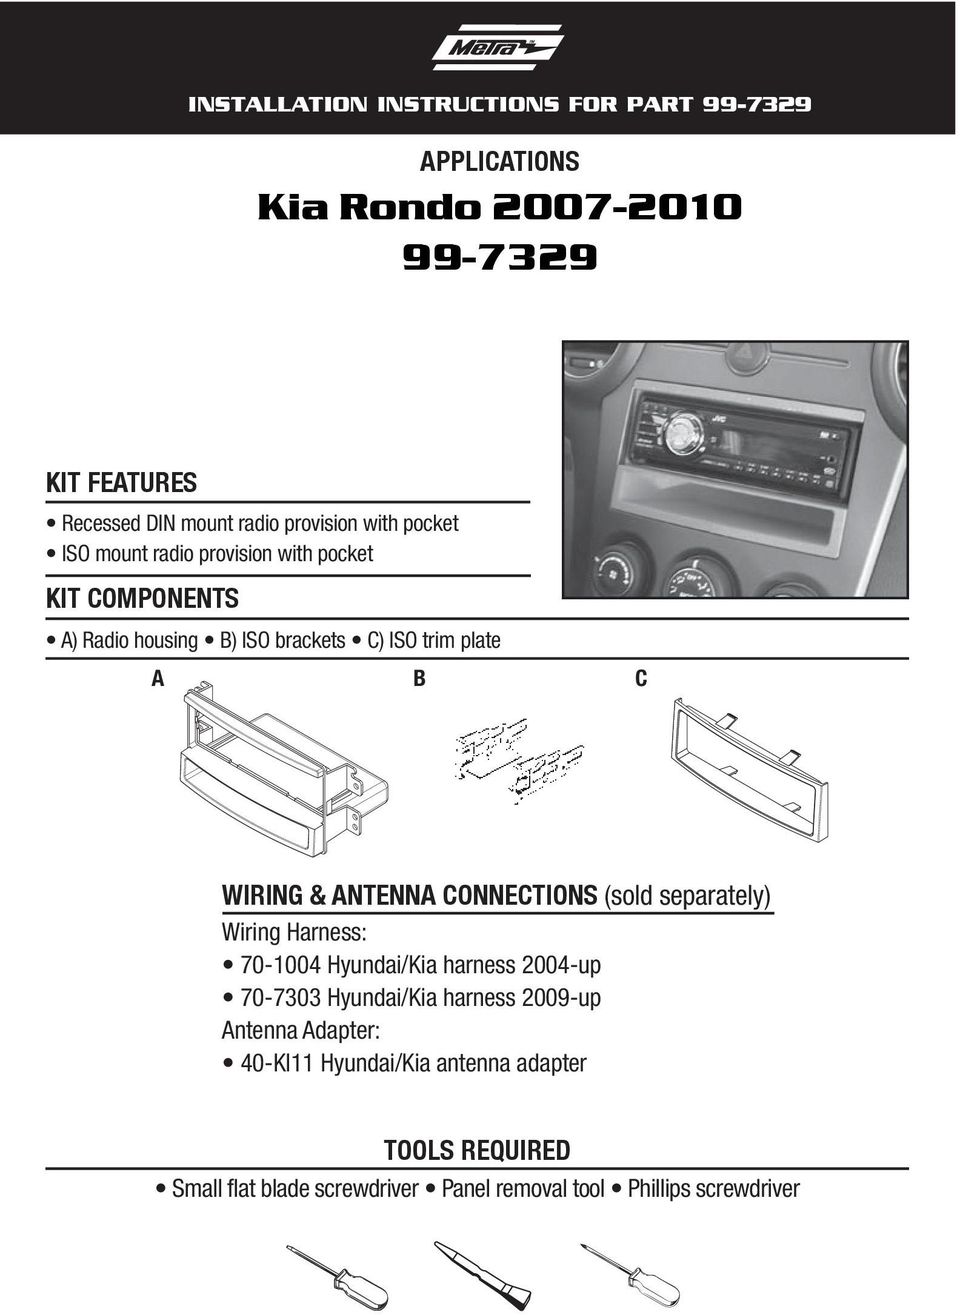 ANTENNA CONNECTIONS (sold separately) Wiring Harness: 70-1004 Hyundai/Kia harness 2004-up 70-7303 Hyundai/Kia harness 2009-up